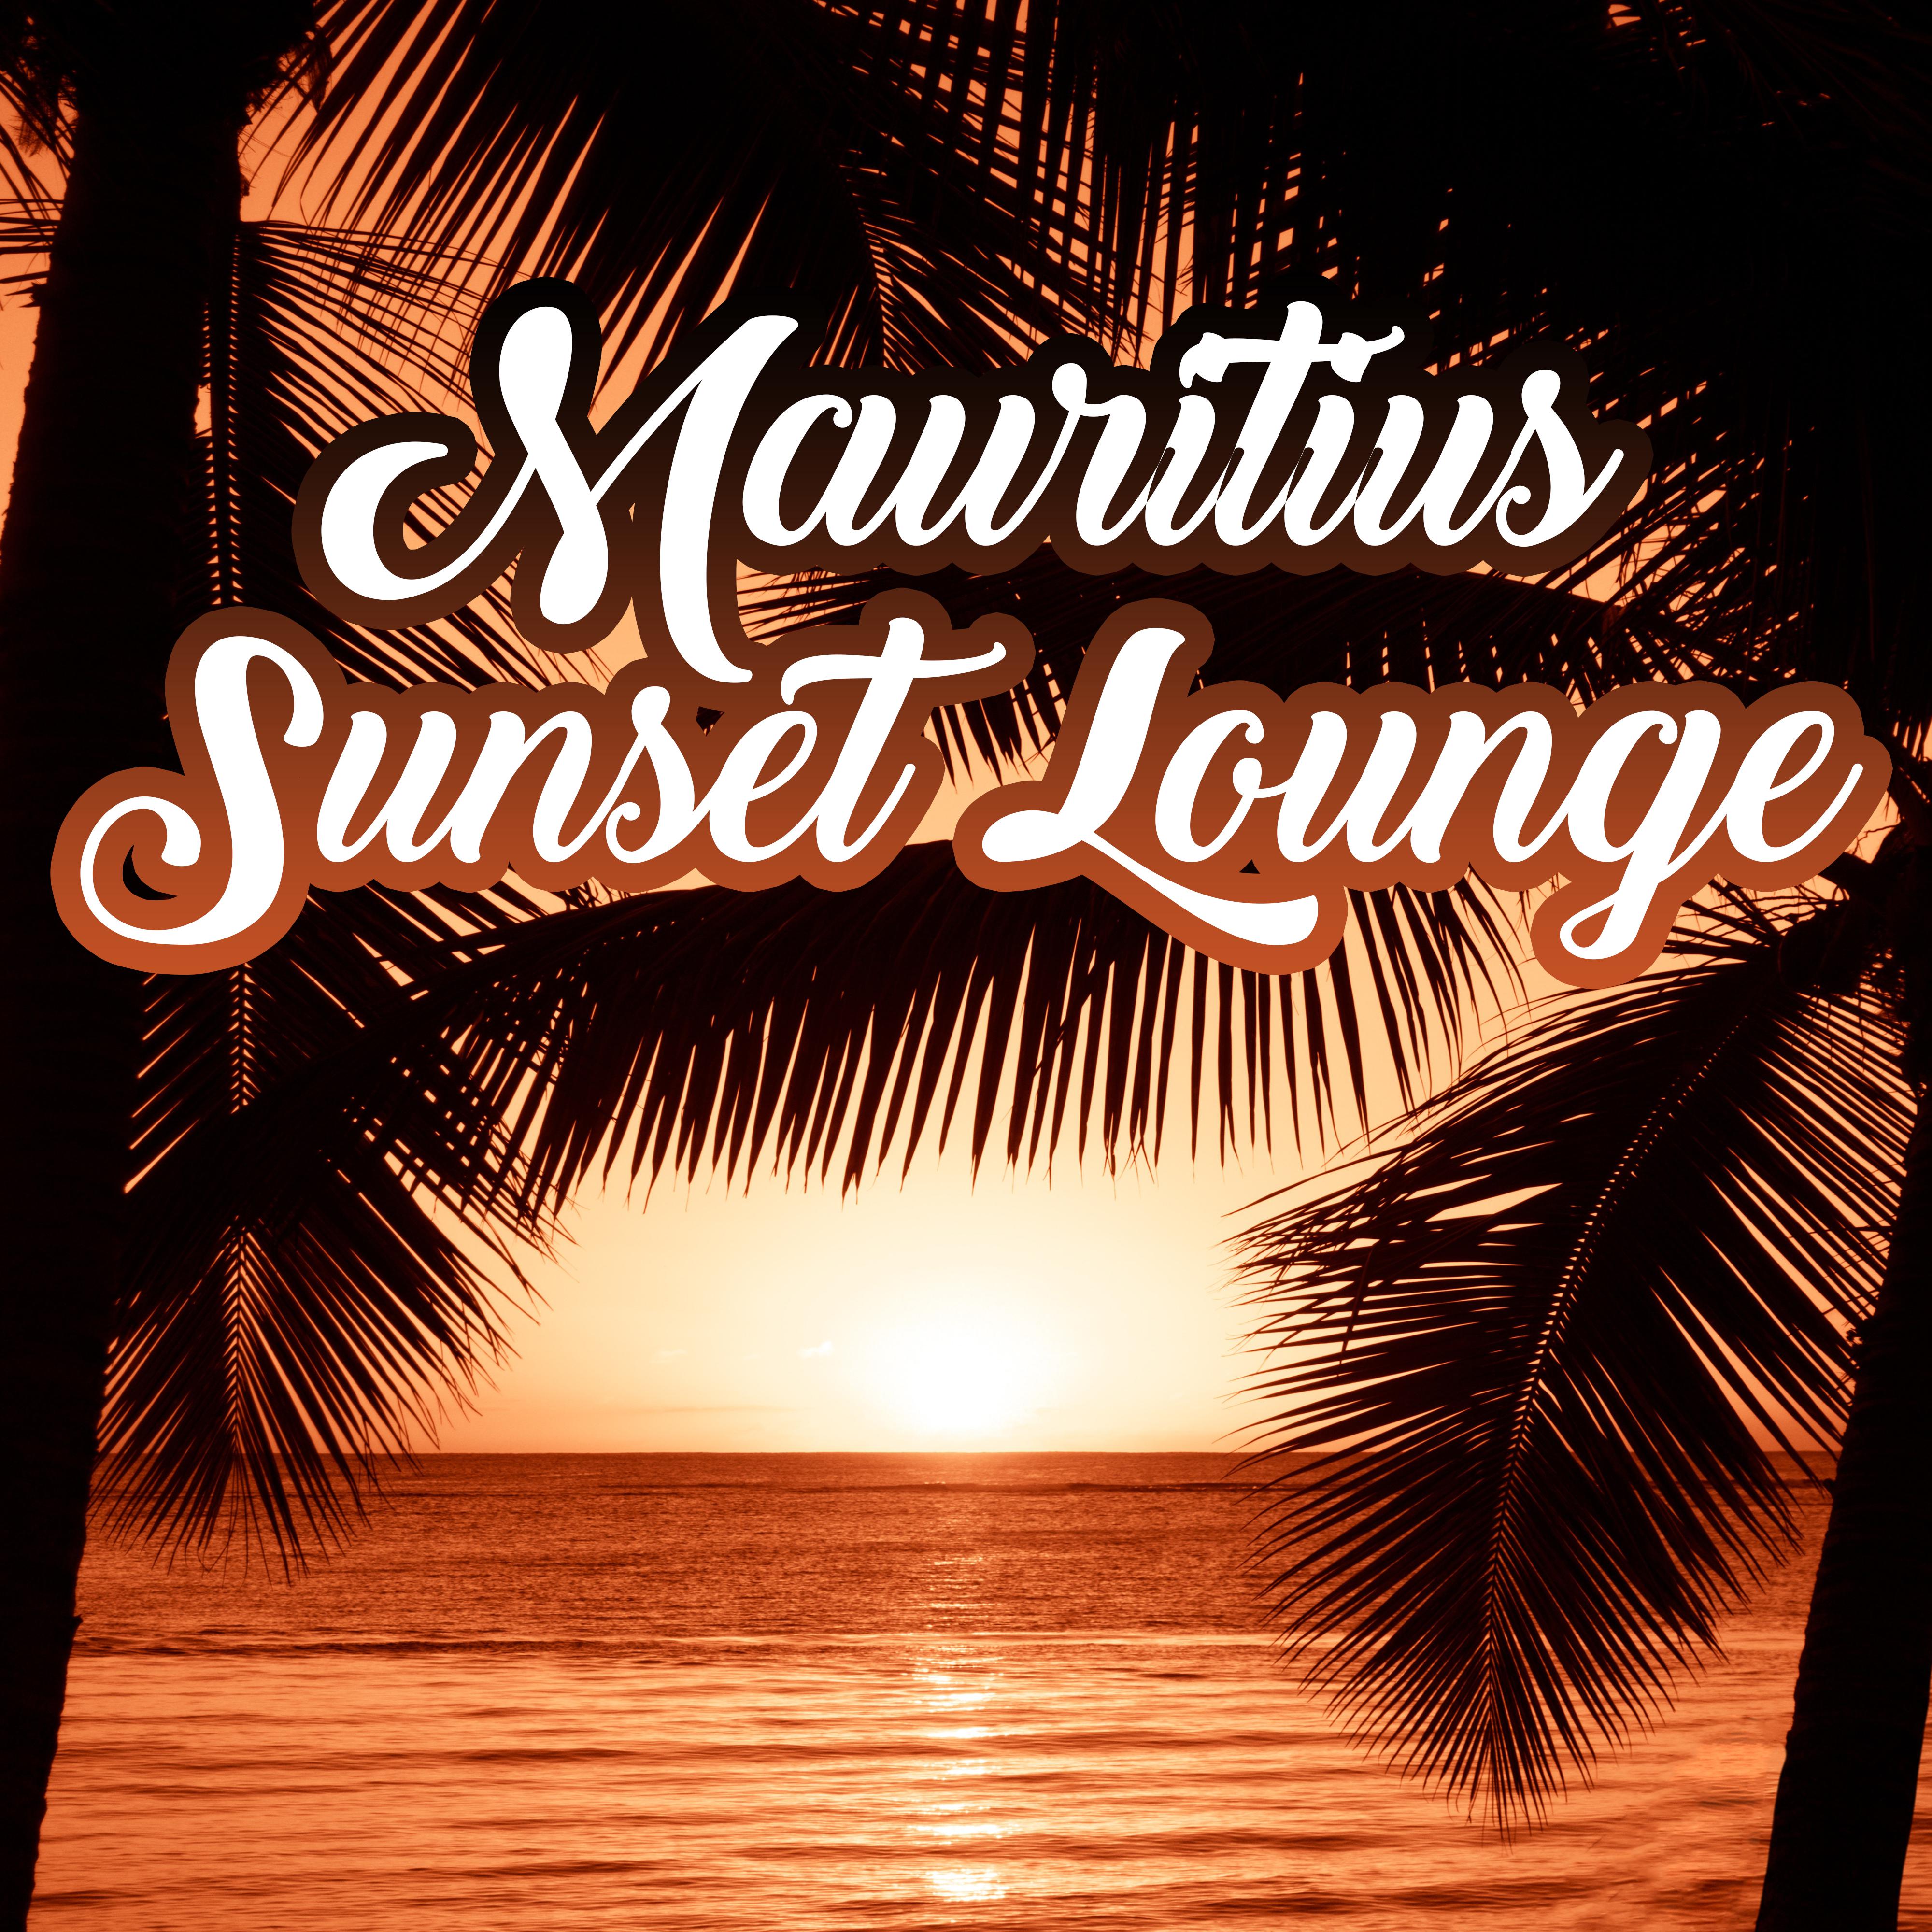 Mauritius Sunset Lounge  Summer Chill Out 2019, Relaxing Vibes, Beach Music, Chillout Songs for Relax, Rest, Sleep